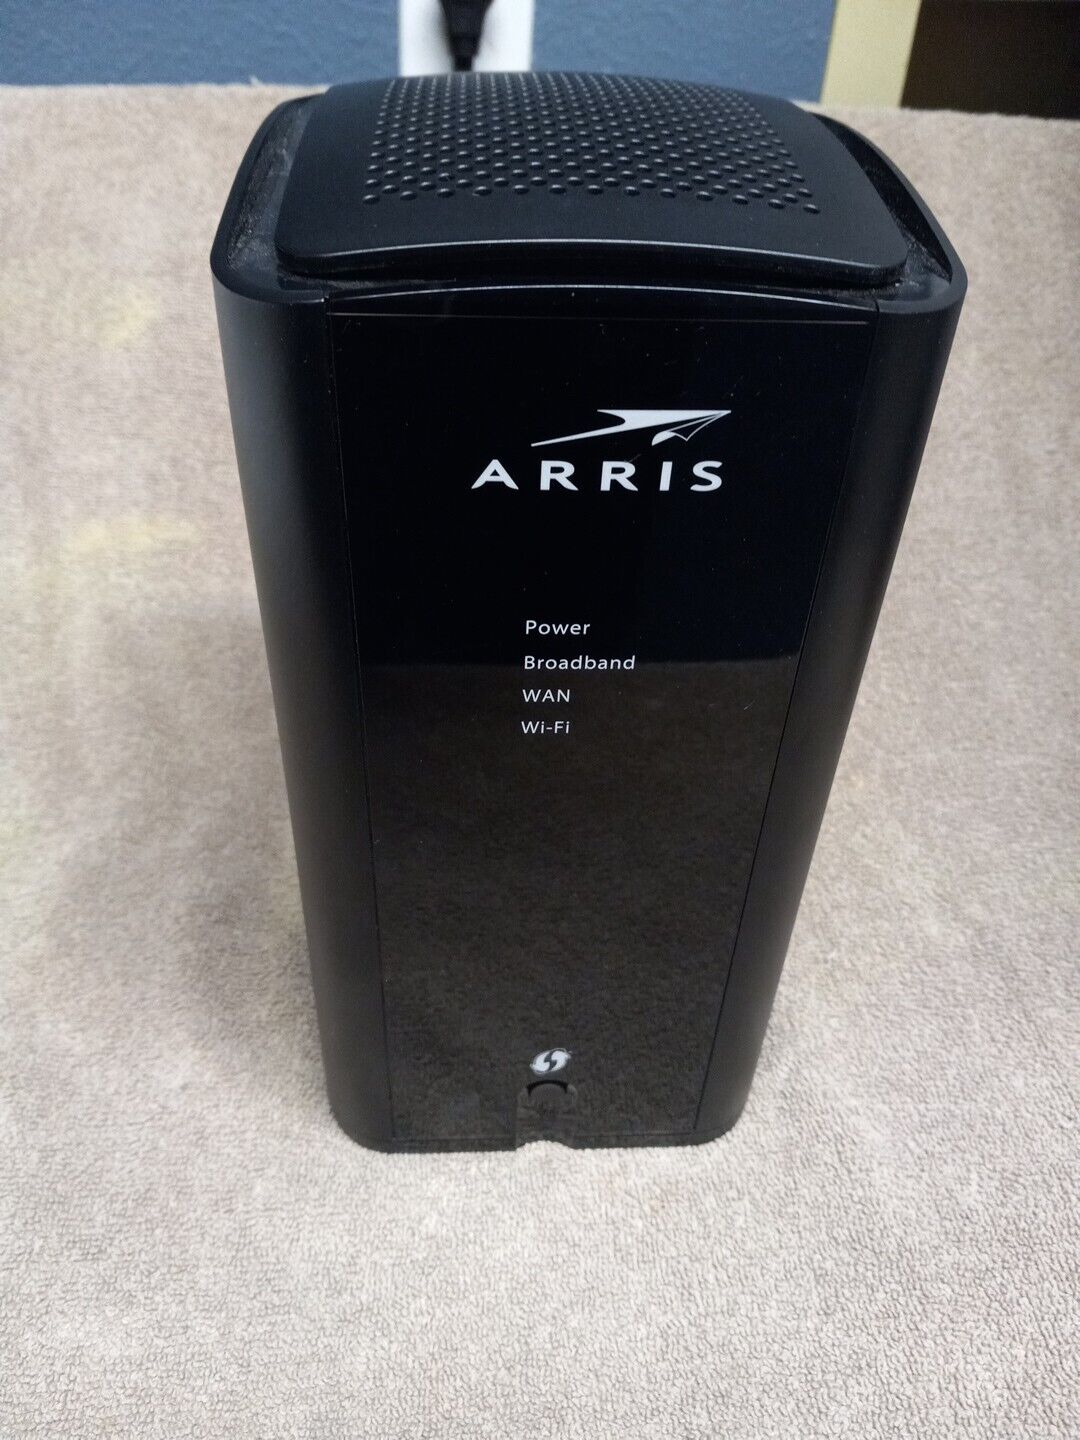 Verizon ARRIS NVG558HX LTE Router ONLY - NO POWER CORD - WORKS GREAT